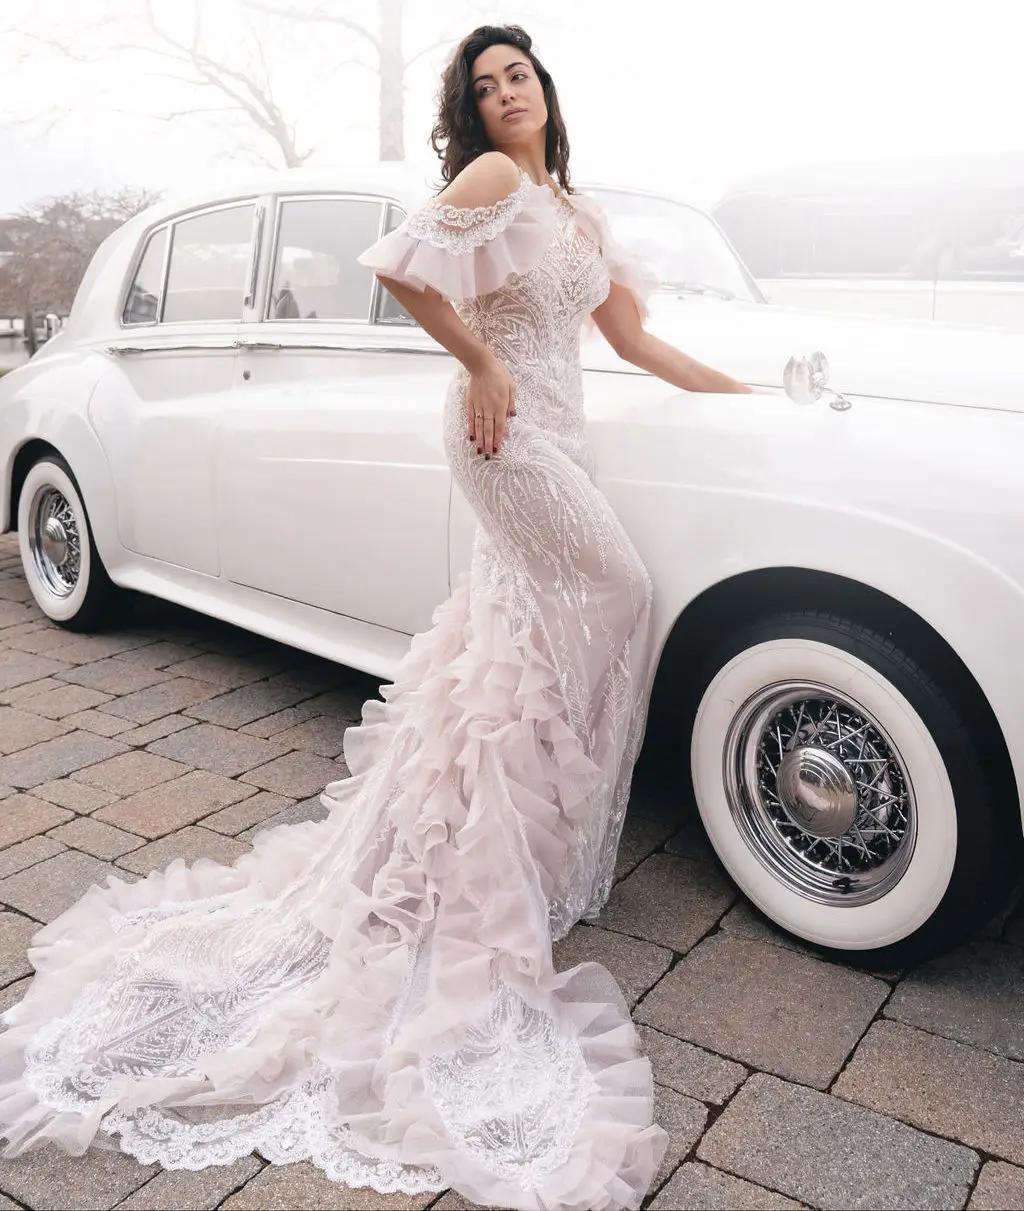 Model wearing Bridal dress leaning next to a car